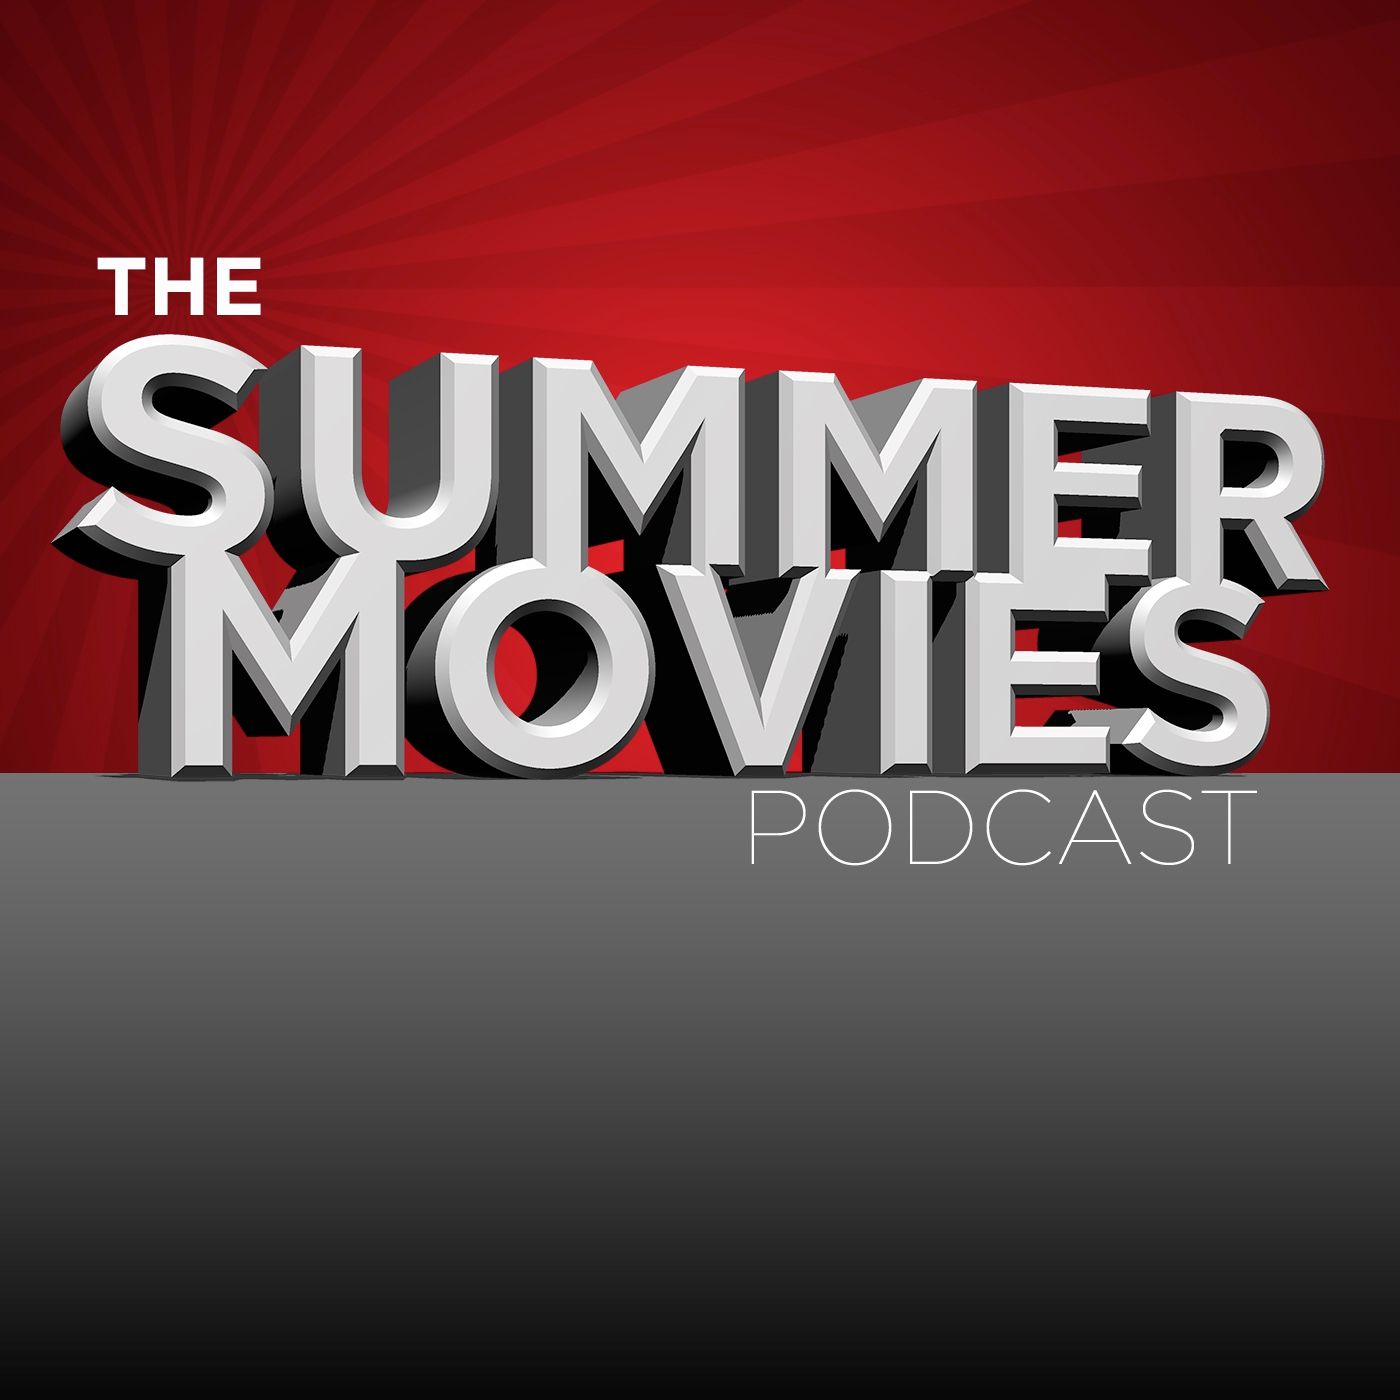 The Summer Movies Podcast